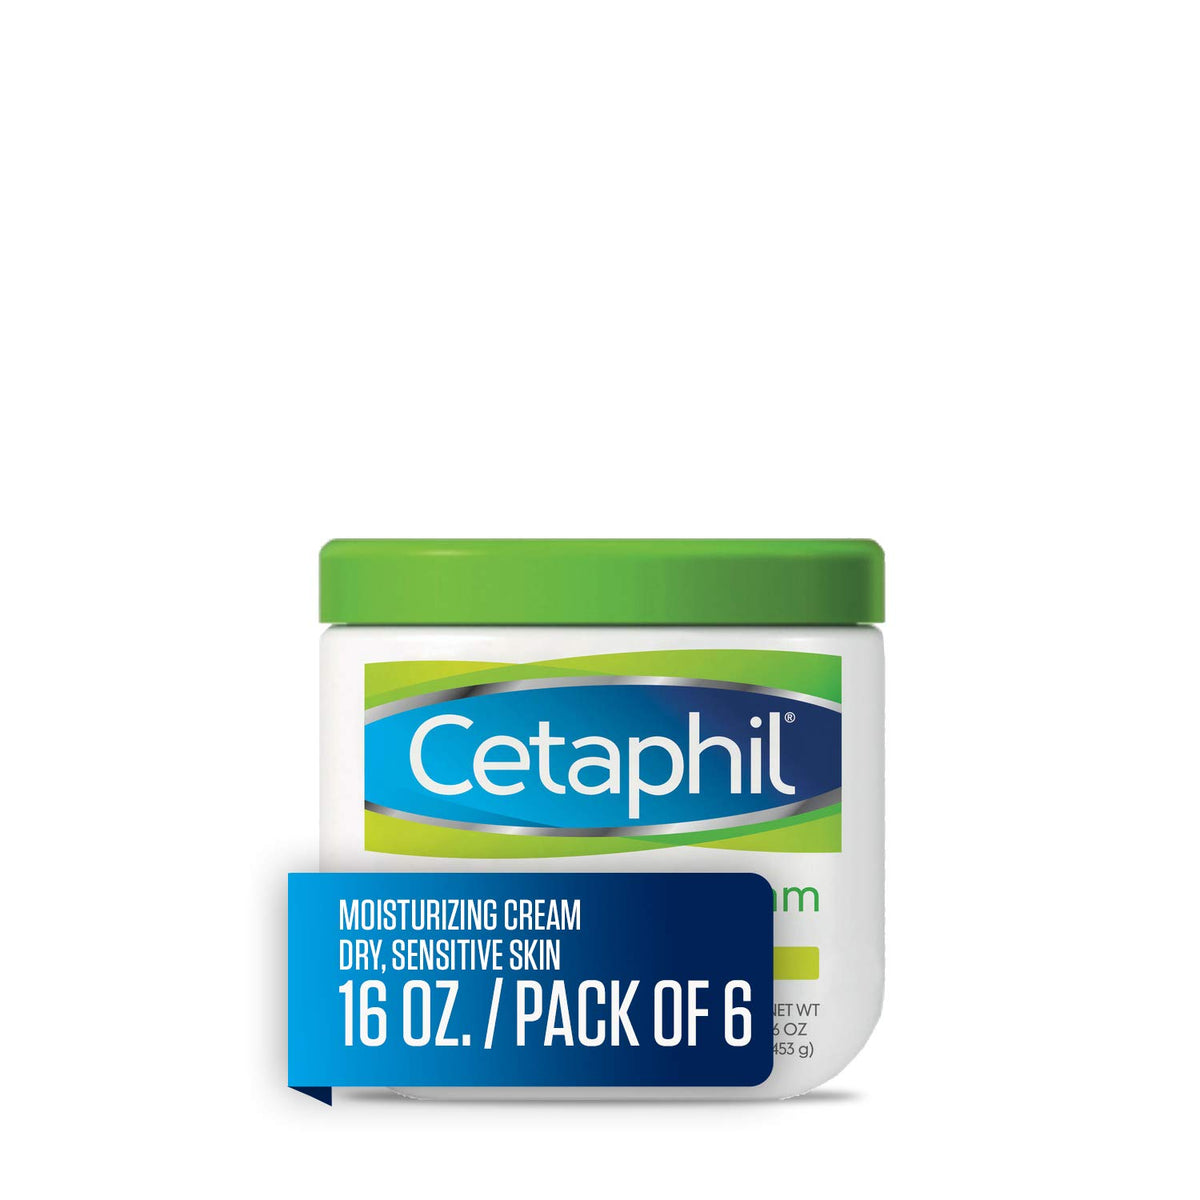 Cetaphil Moisturizing Cream for Very Dry/Sensitive Skin, Fragrance Free, 16 Ounce, Pack of 6